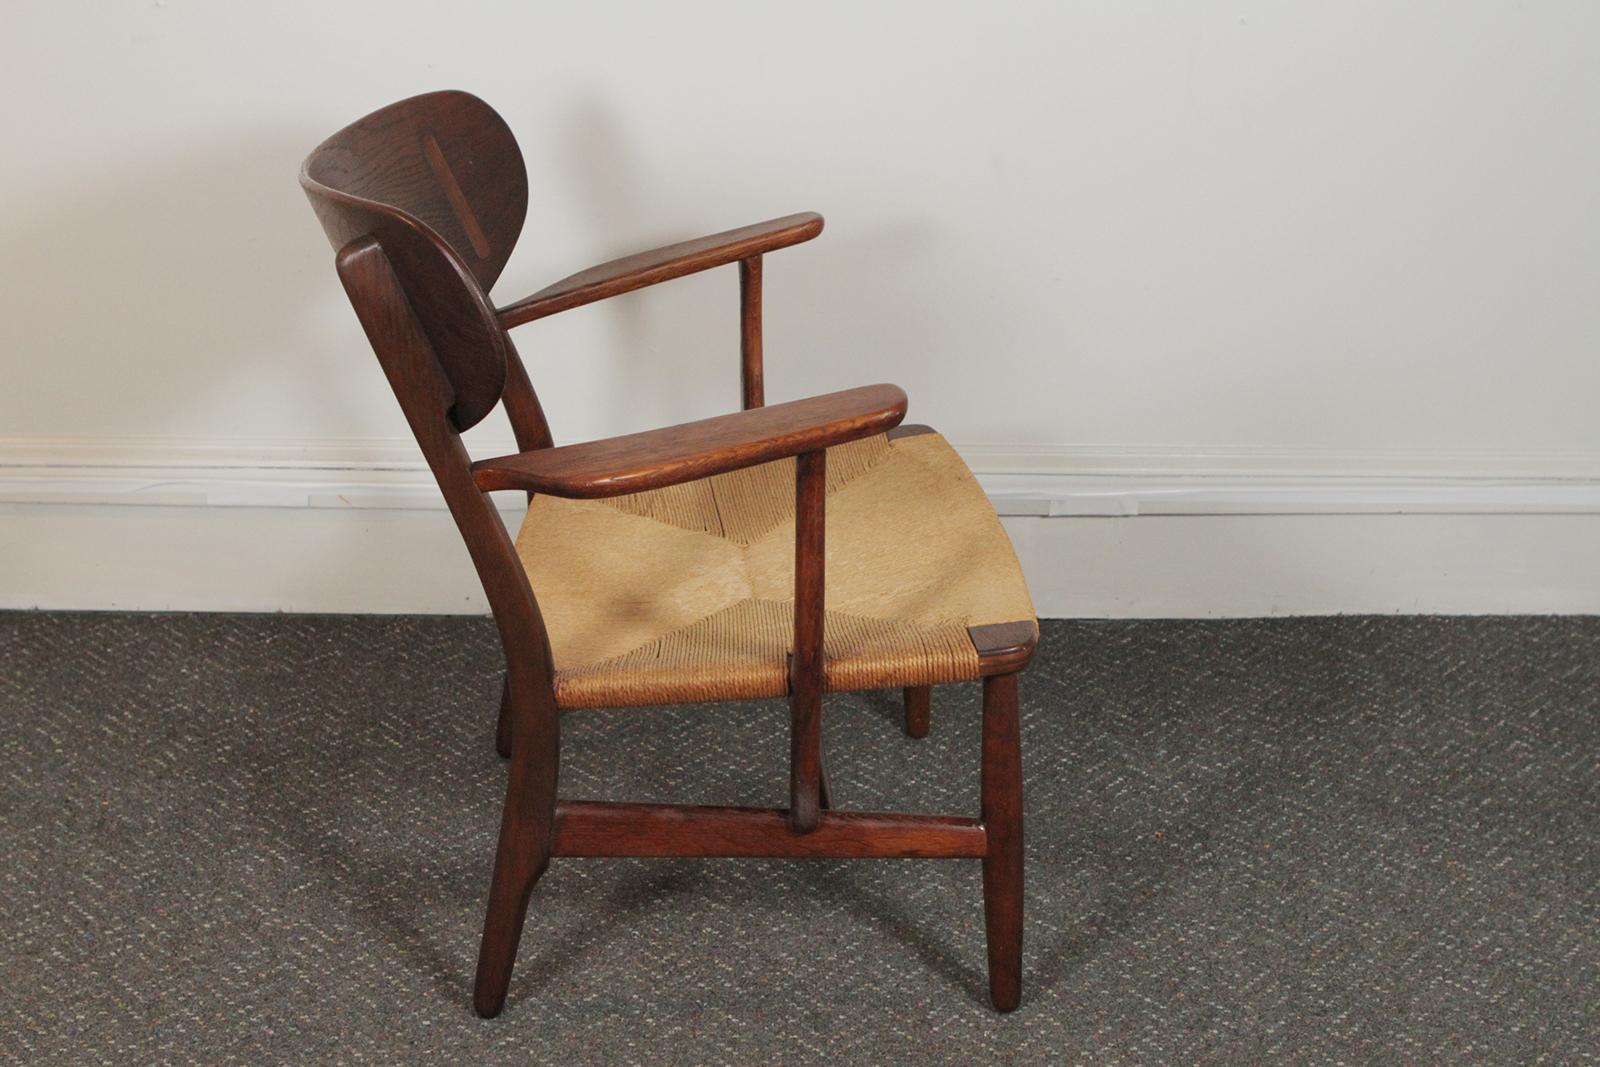 Hans Wegner for Carl Hansen and Son CH-22 lounge chair, 1950s, Denmark.
Original oak armchair with wide paddle form arms and sculpted and inlaid back. Danish paper cord seat. This sale is for one chair.
The chair was designed by Hans J. Wegner and